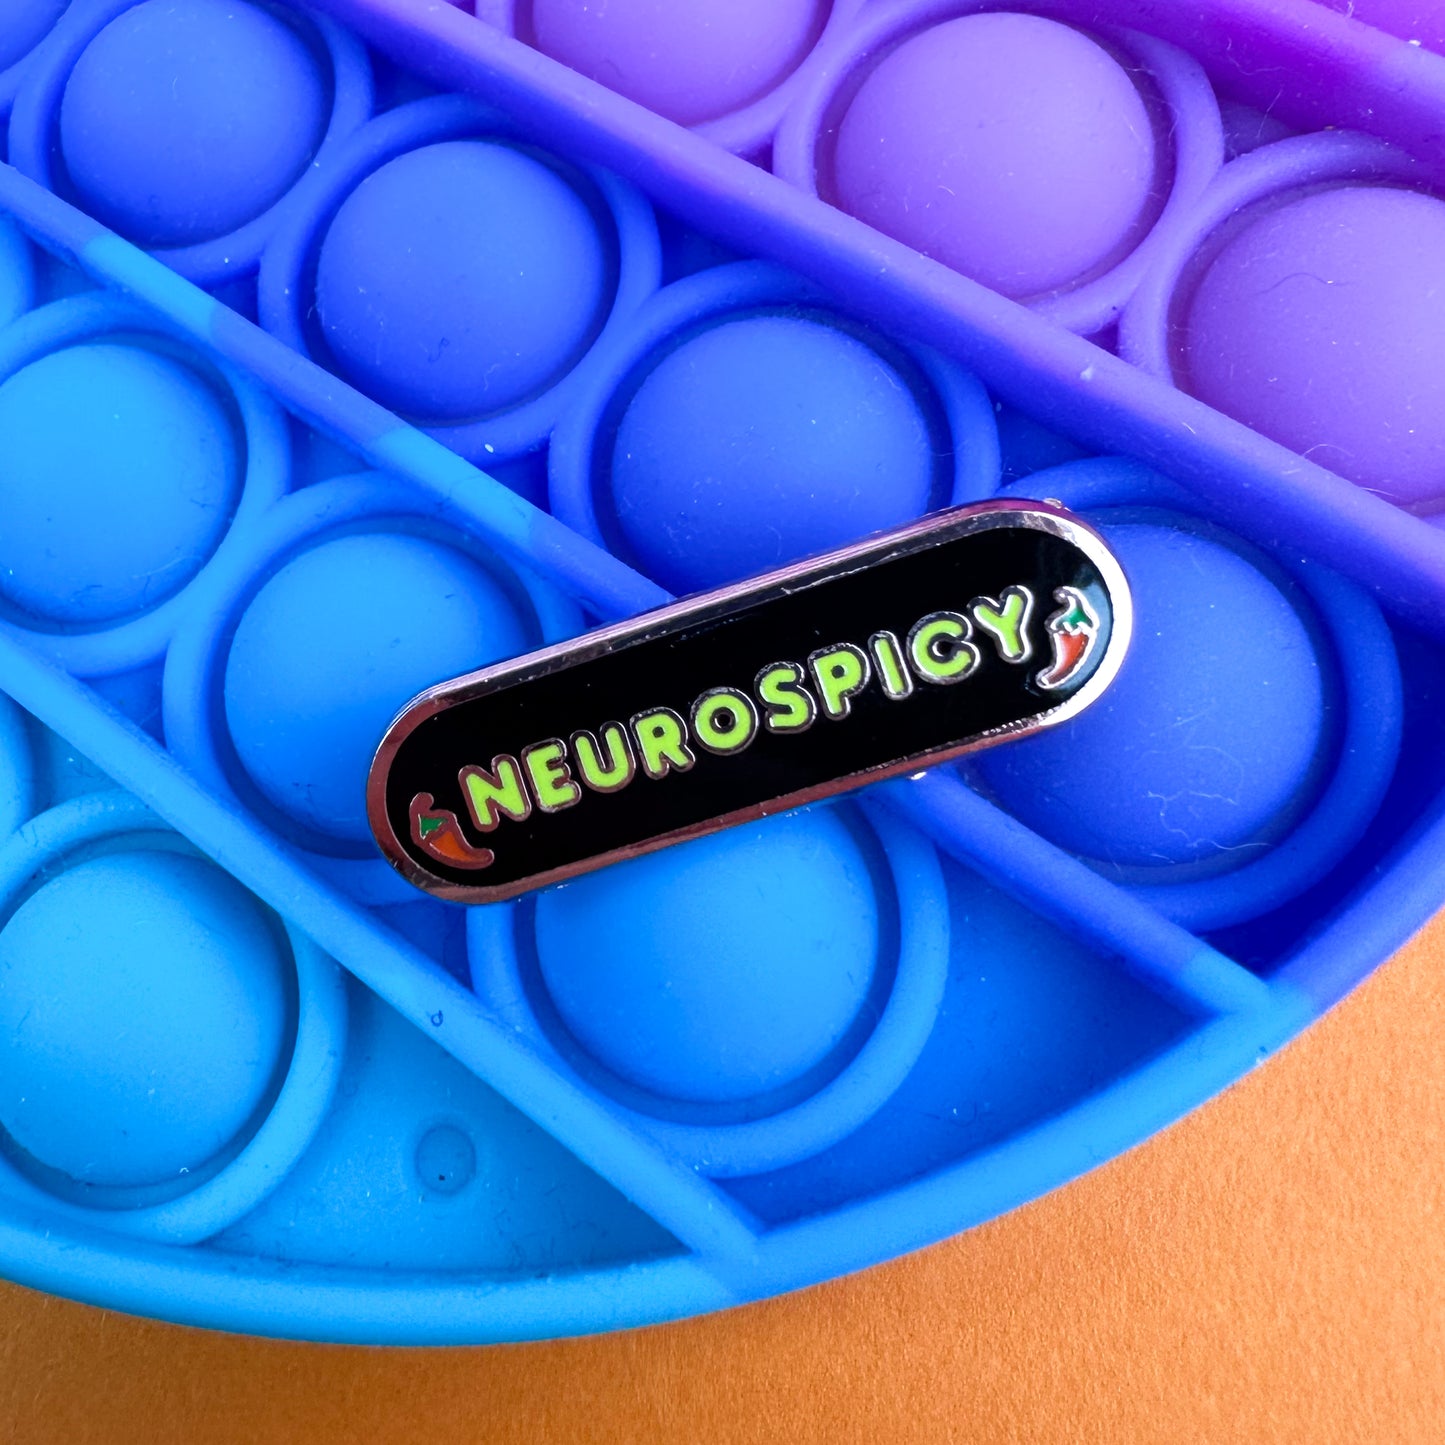 A capsule shaped enamel pin that reads "Neurospicy" with chili peppers around it on a pop it fidget toy. 